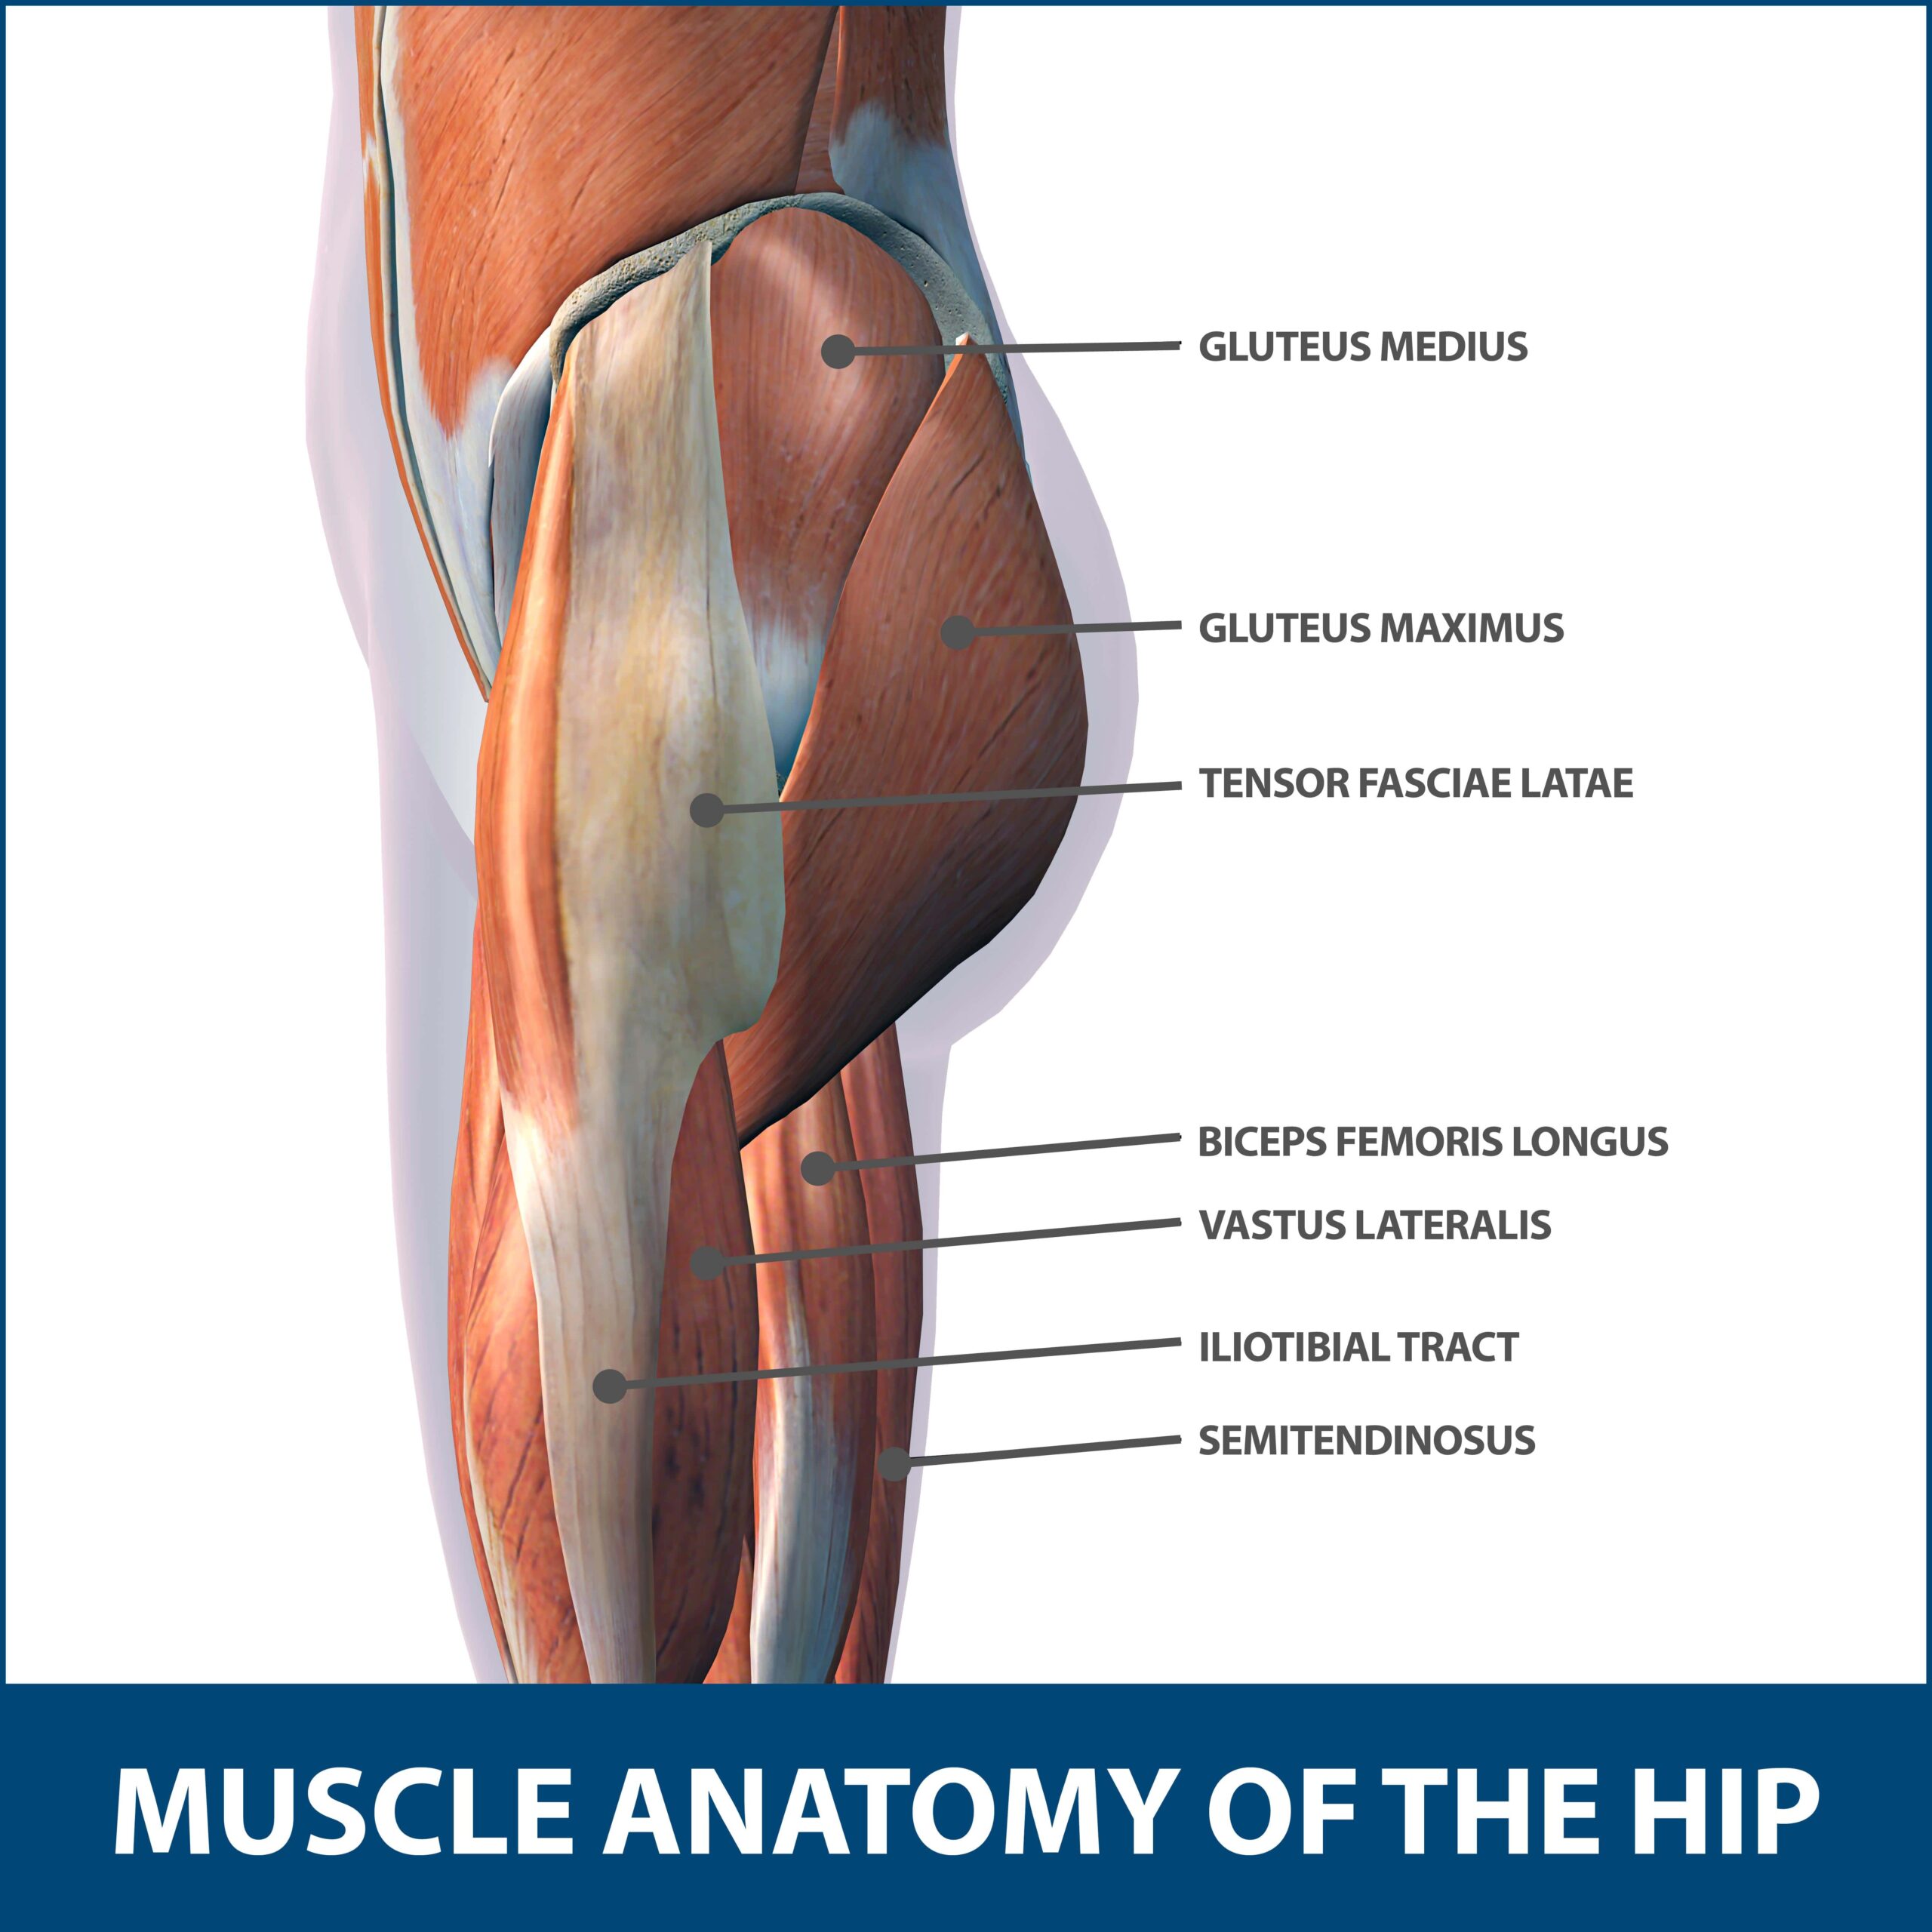 How Do I Know If My Hip Pain Is Serious? Hip Gives Out Suddenly!